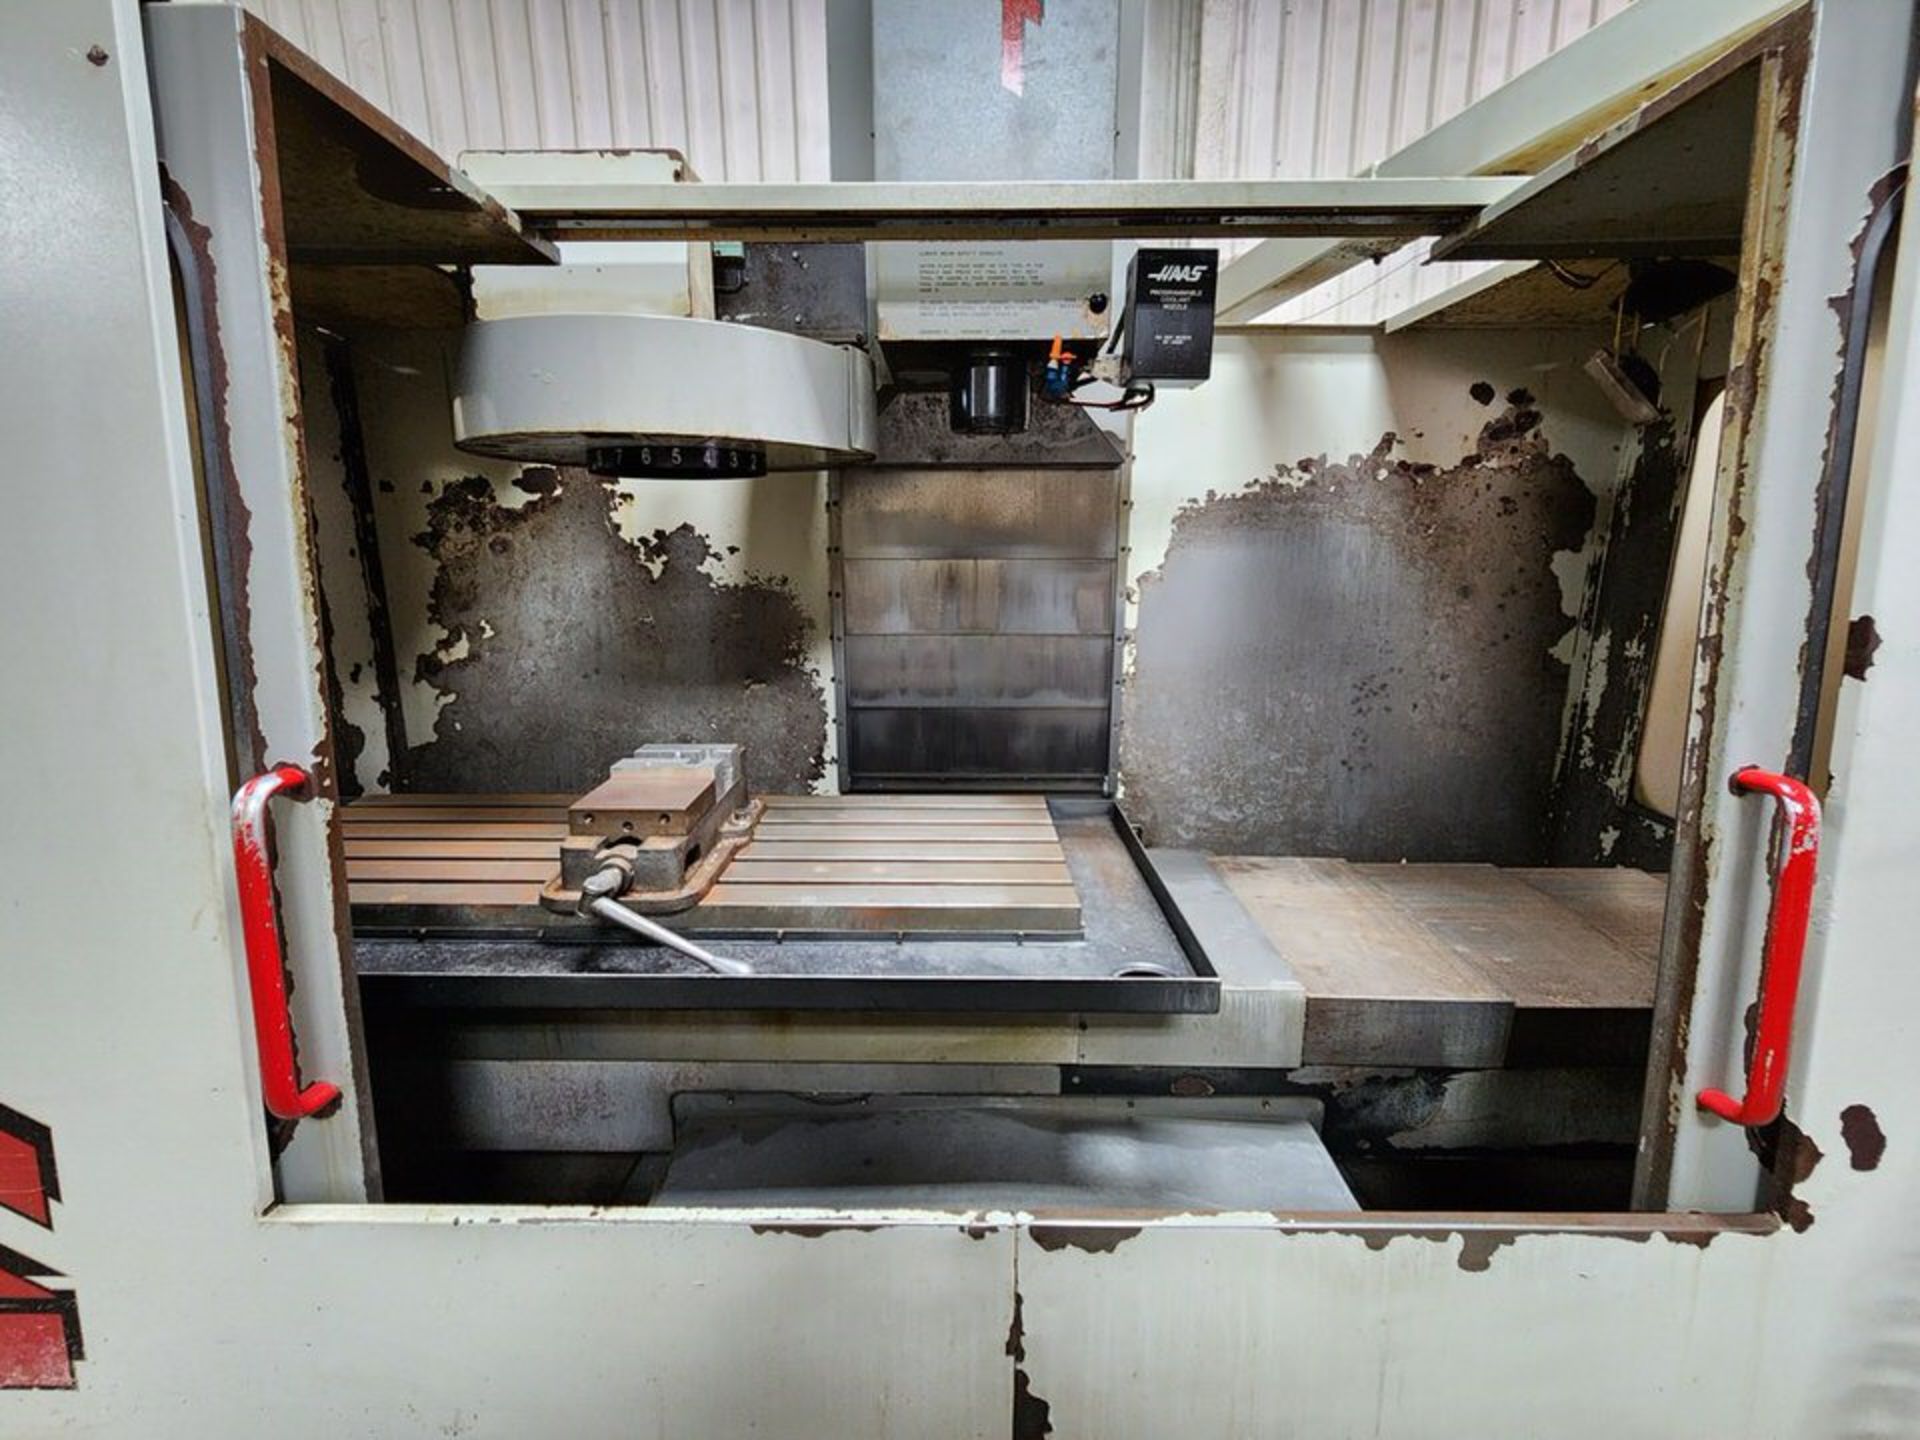 1996 Haas VF3 Milling Machine 208/230V, 3PH, 50/60HZ, Full Load: 40A; Largest Load: 30A; - Image 4 of 18